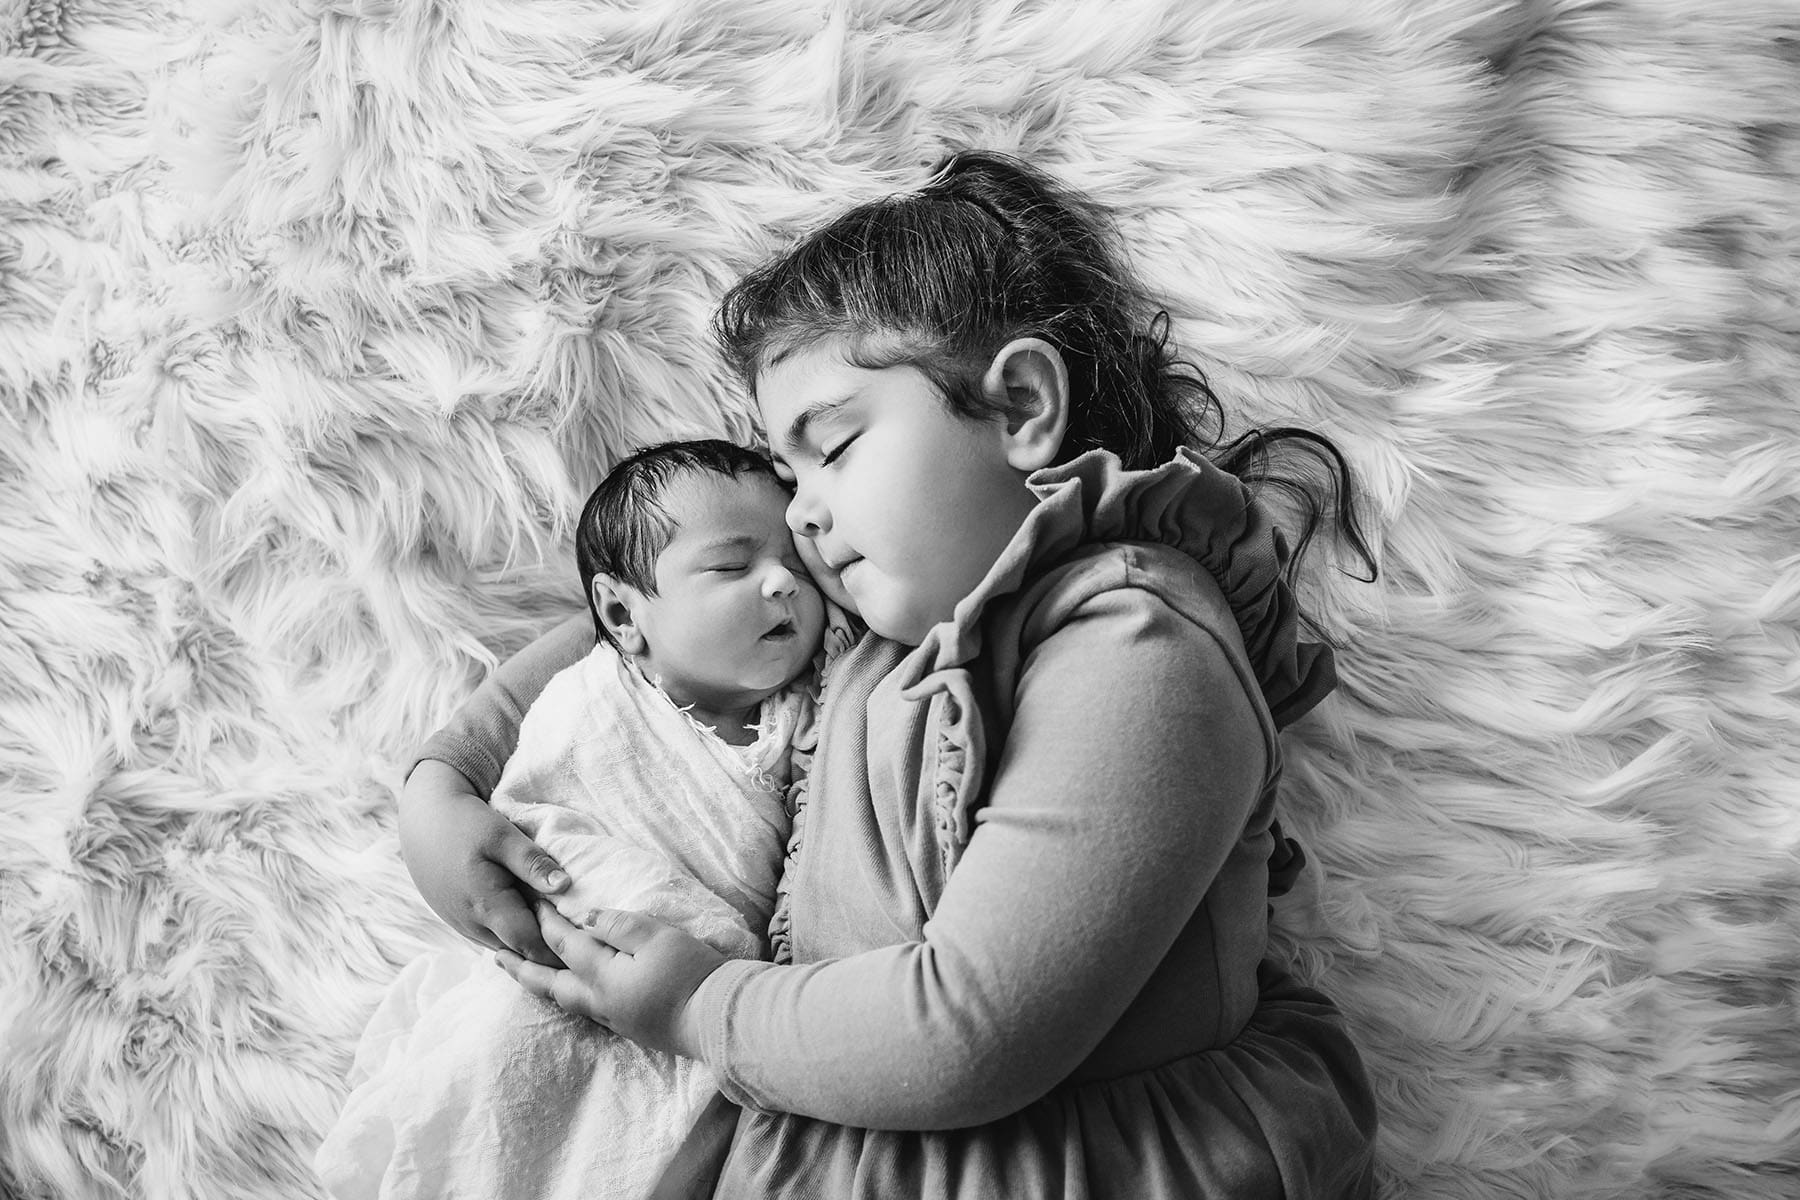 A little girl and a newborn baby lay snuggled together on a white rug